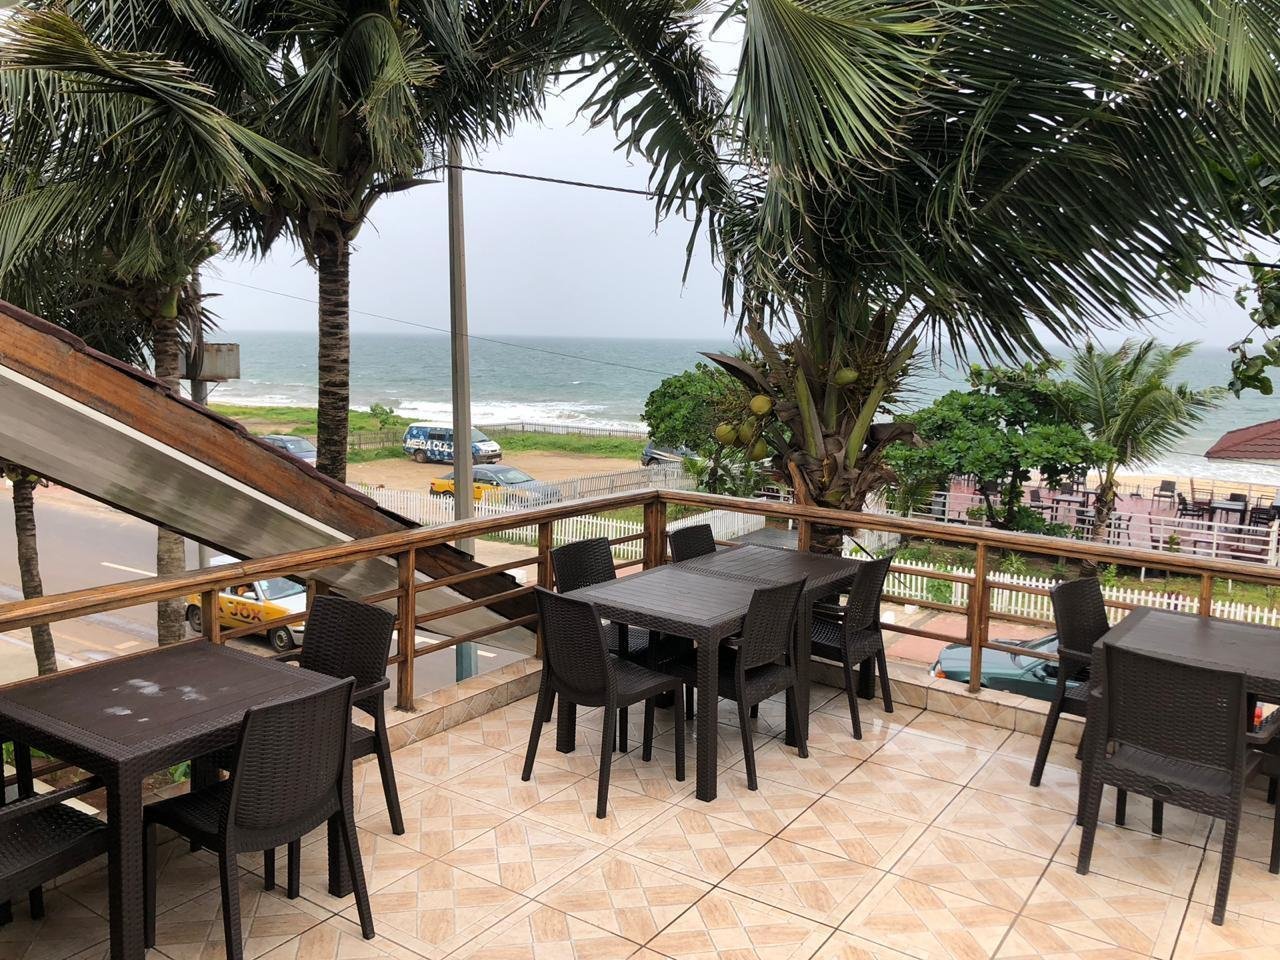 <span class="translation_missing" title="translation missing: en.meta.location_title, location_name: Roy Hotel &amp; Restaurant, city: Freetown">Location Title</span>